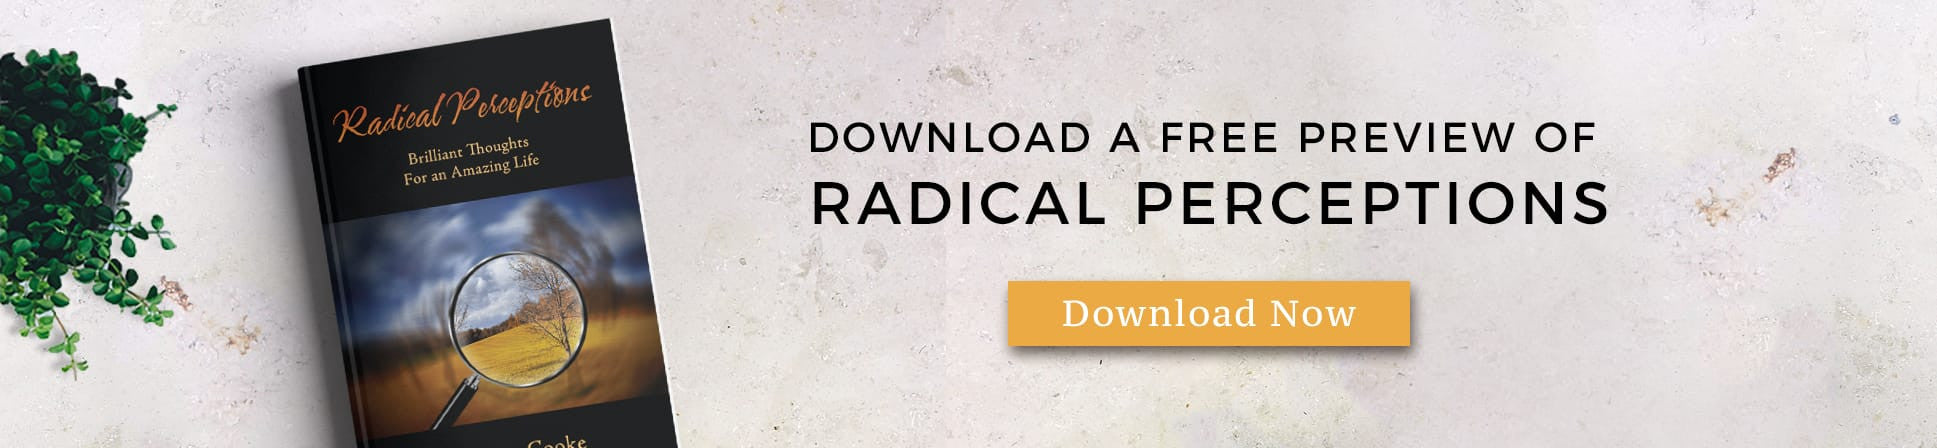 Radical Perceptions FREE preview